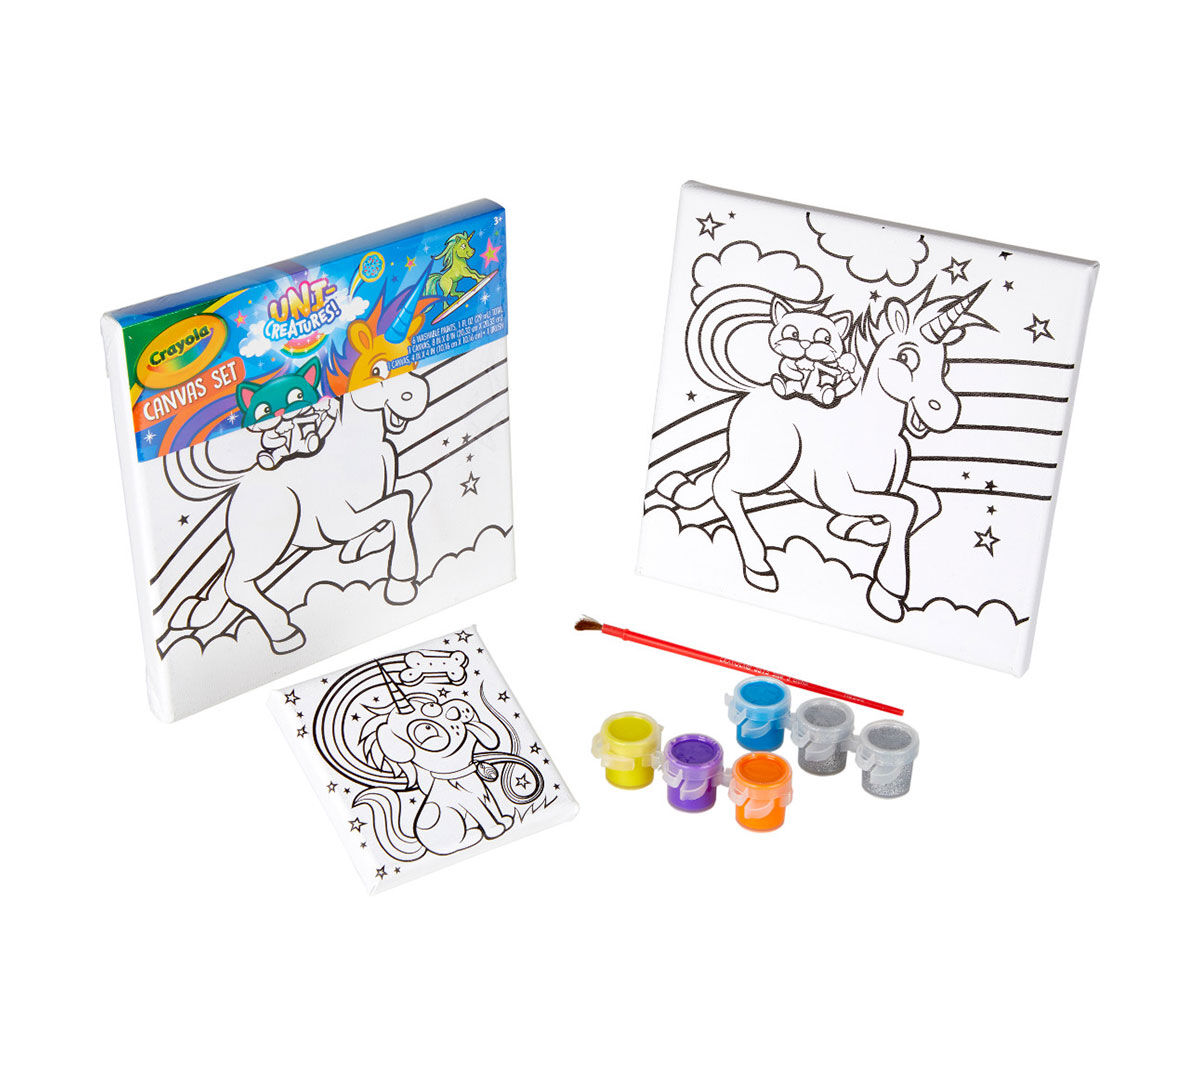 Gift for Kids 5 Ages 3 Crayola Unicorn Canvas Paint Set Multi-Colored 4 6 One Size 